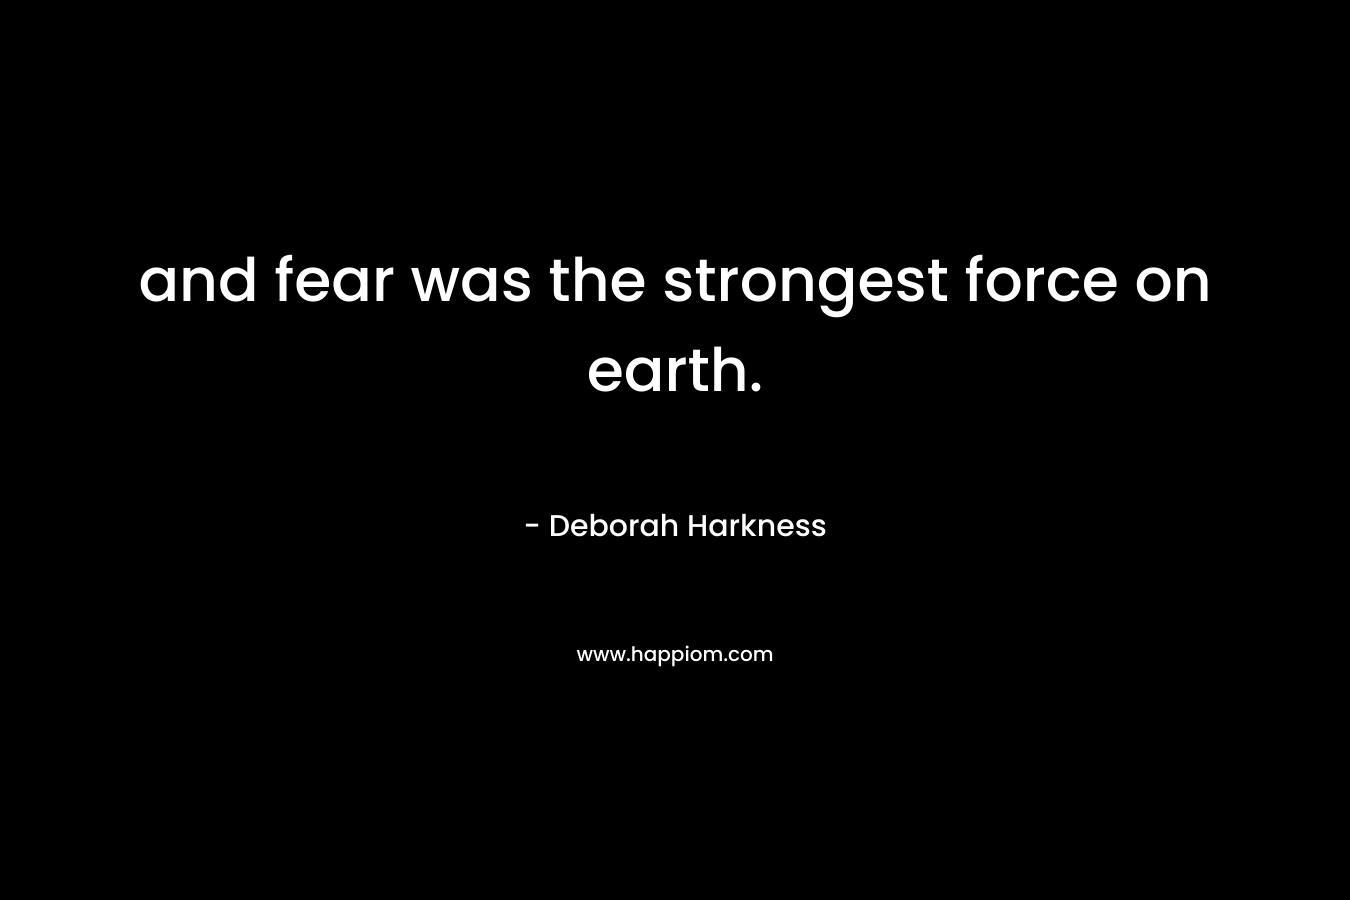 and fear was the strongest force on earth. – Deborah Harkness